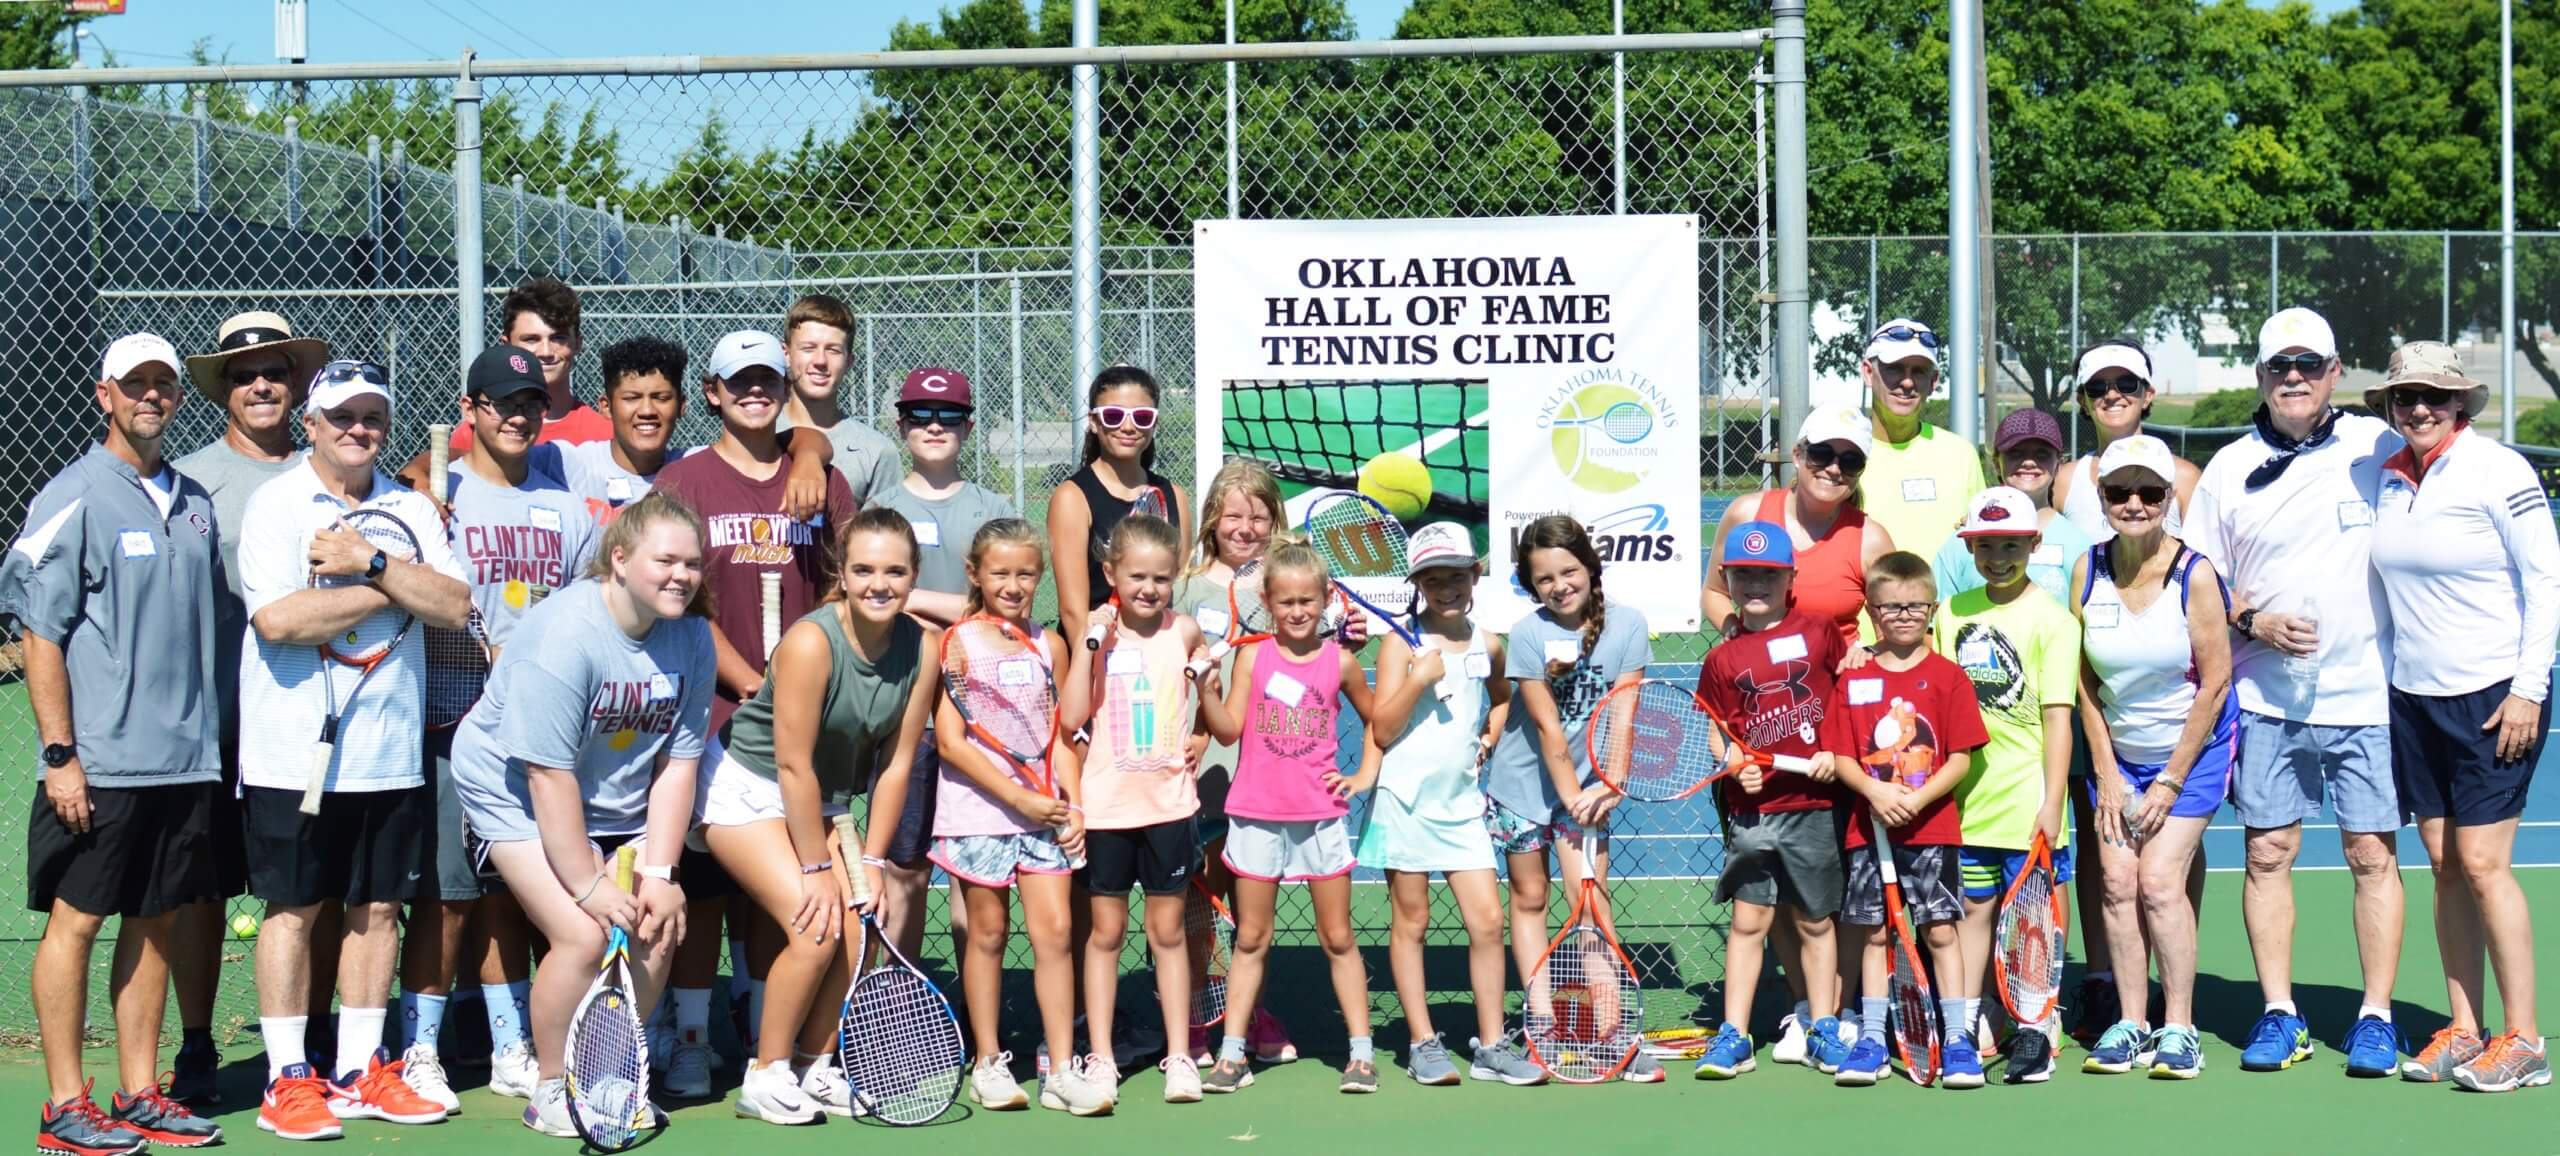 2019 Oklahoma Tennis Hall of Fame Clinic in Clinton, OK 
(Custer and Washita Counties)